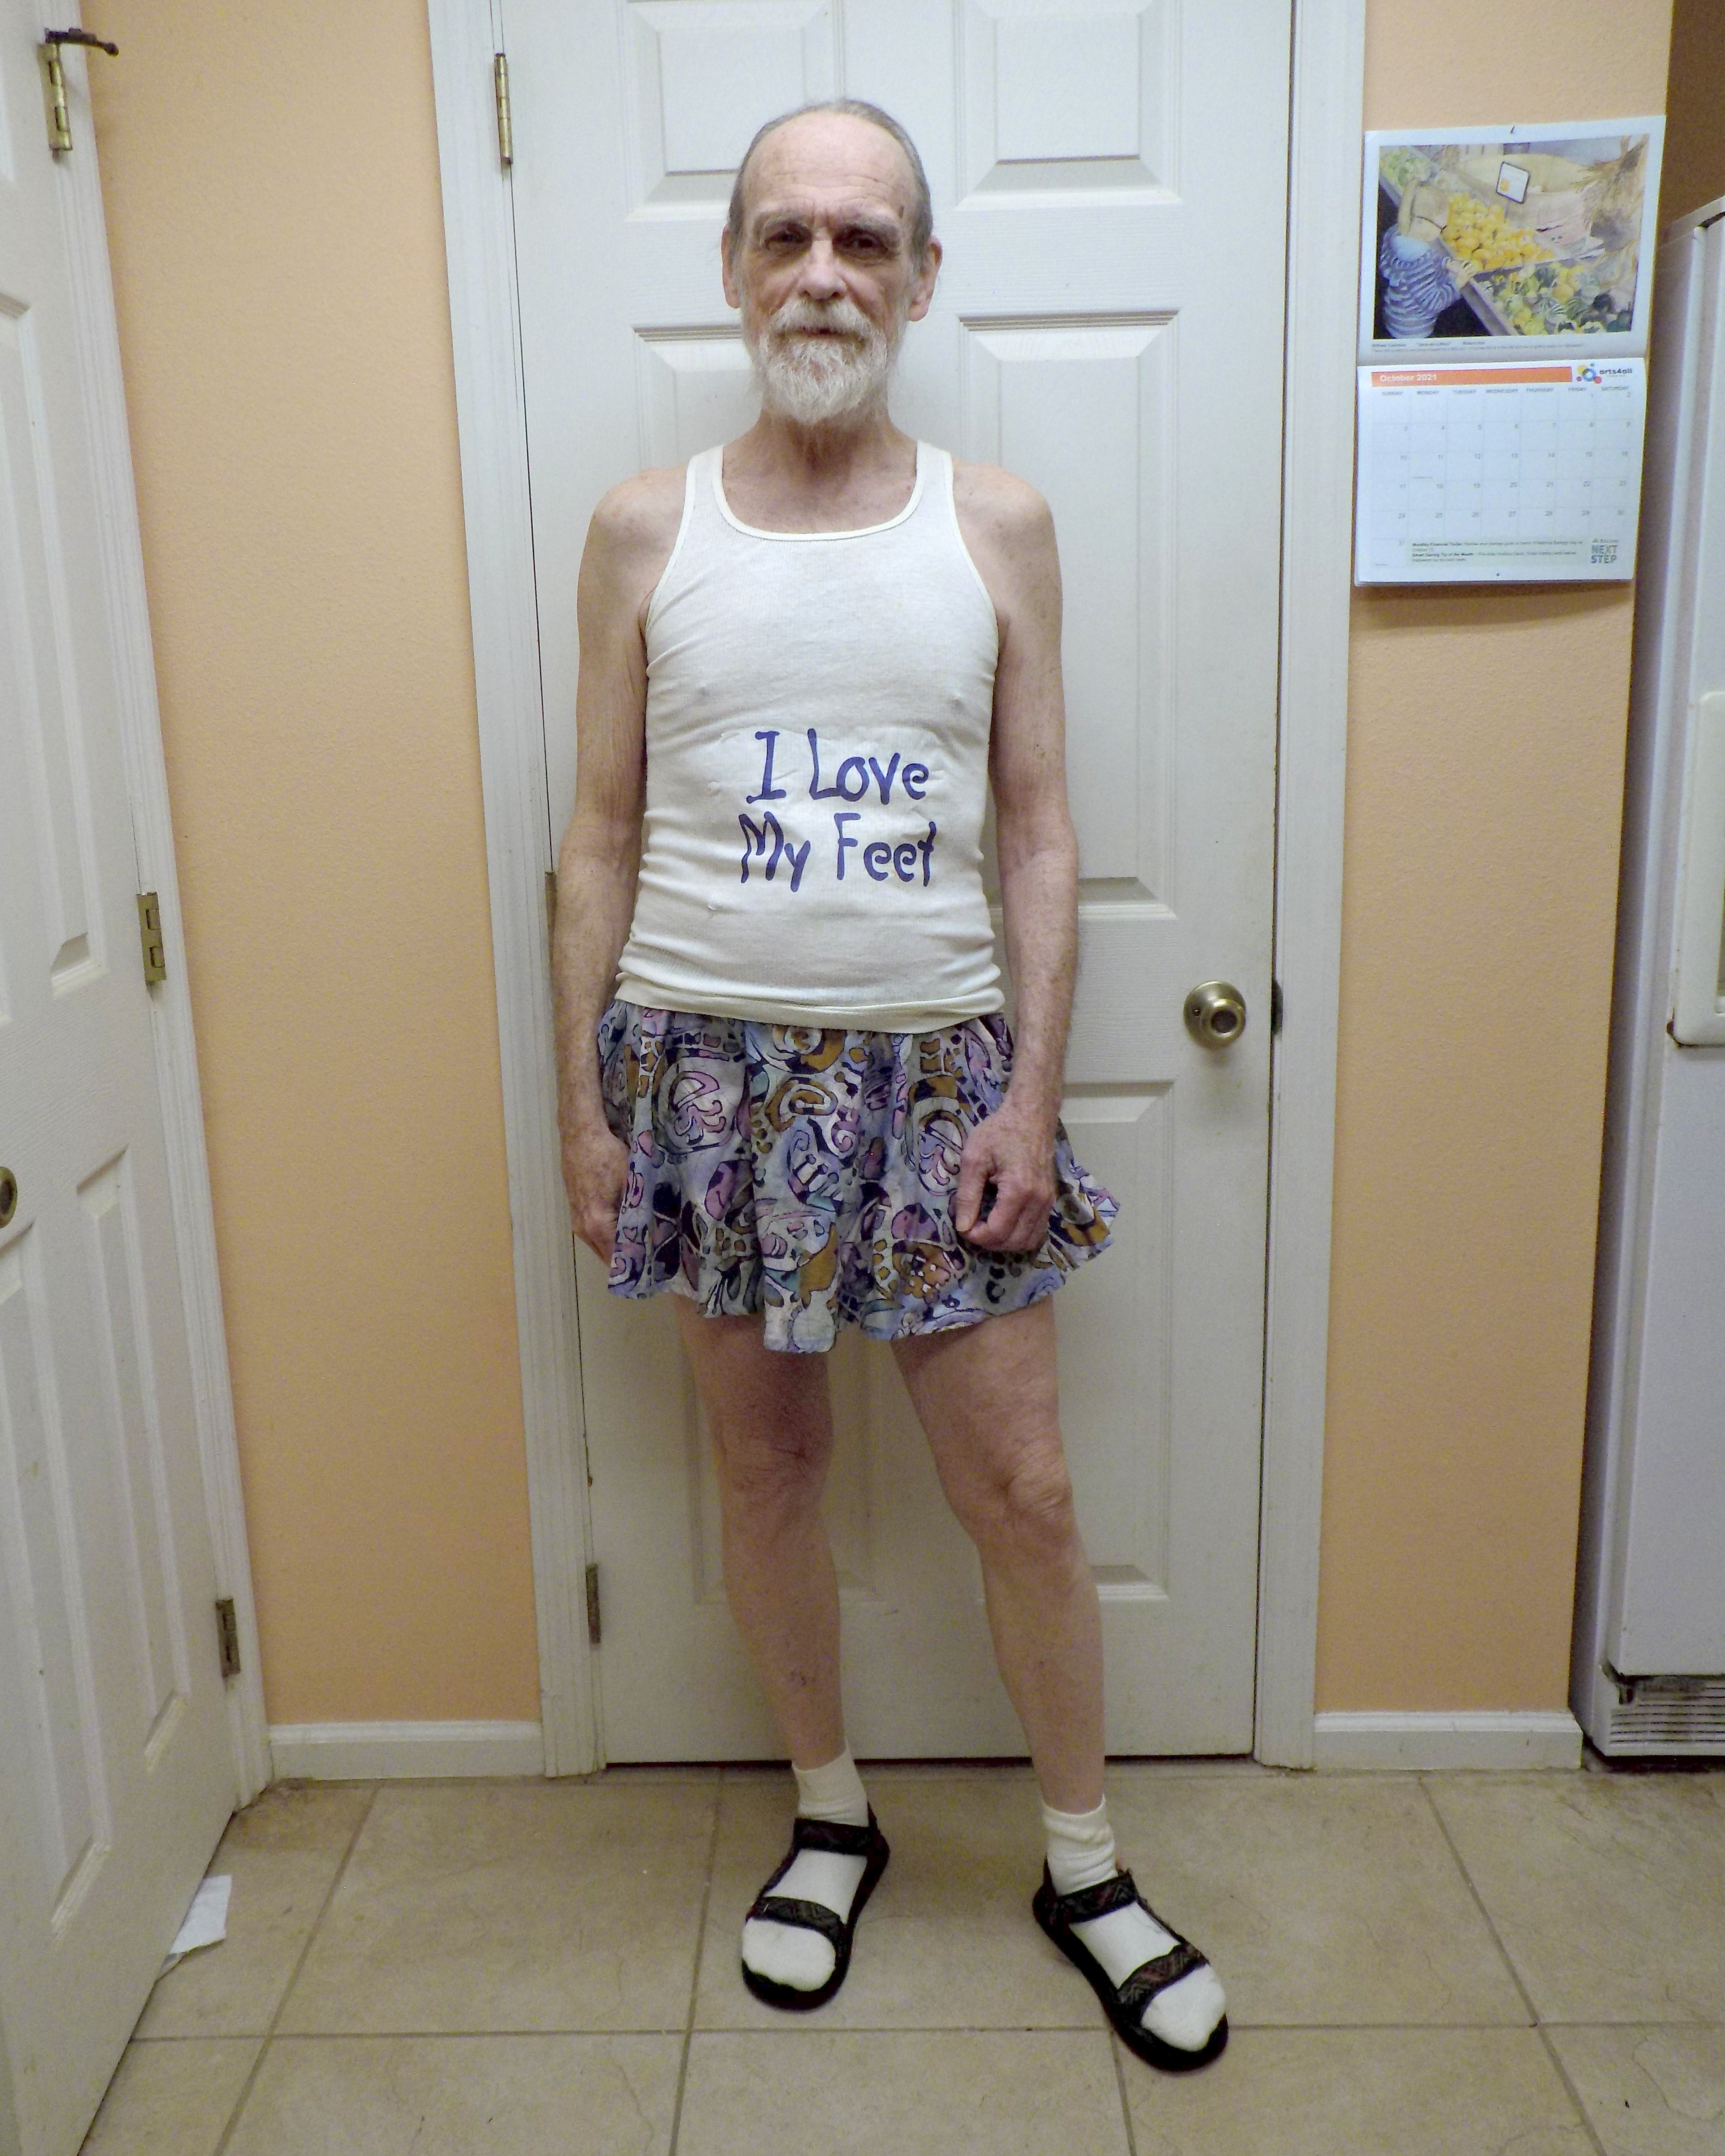 Wearing a tank top that says 'I Love My Feet' and men's skirt with socks and sandals